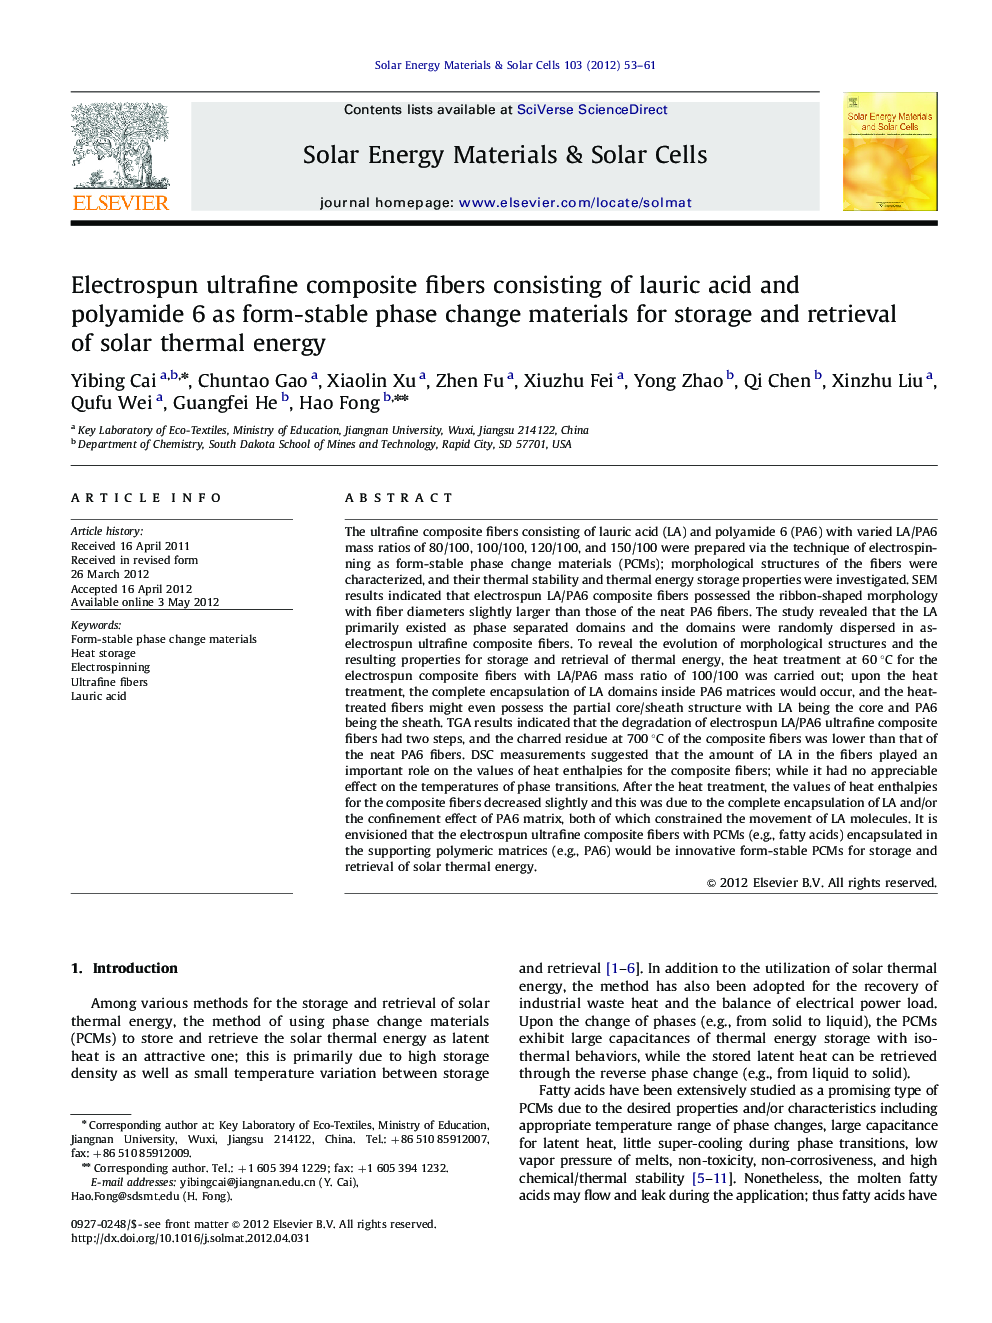 Electrospun ultrafine composite fibers consisting of lauric acid and polyamide 6 as form-stable phase change materials for storage and retrieval of solar thermal energy